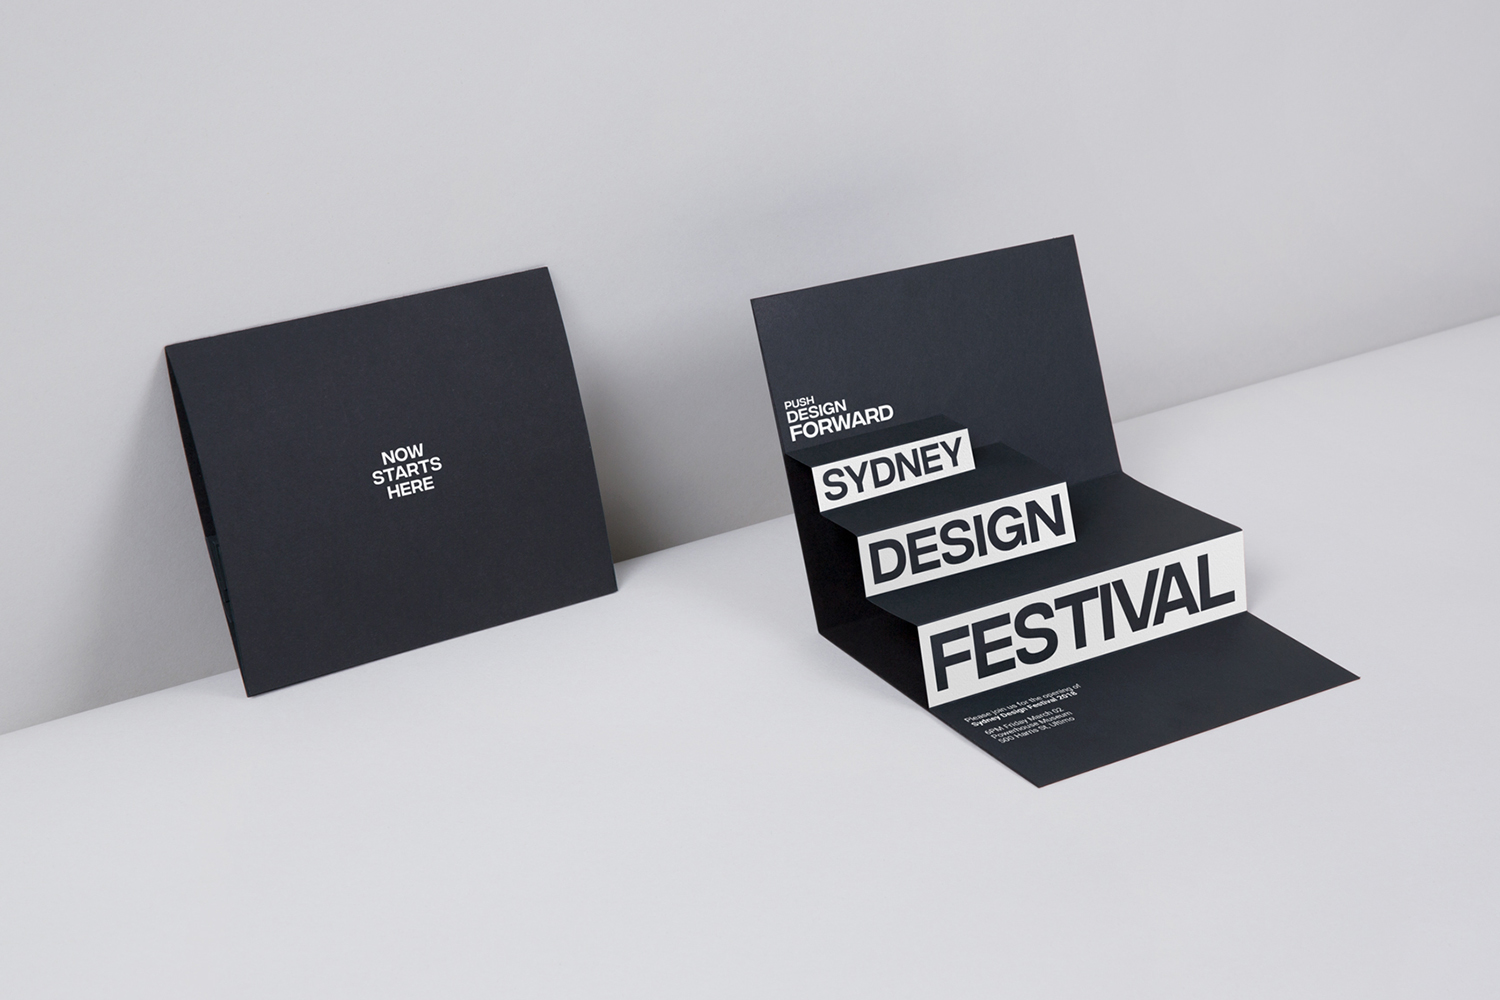 Graphic identity and invitation by Re for the Sydney Design Festival